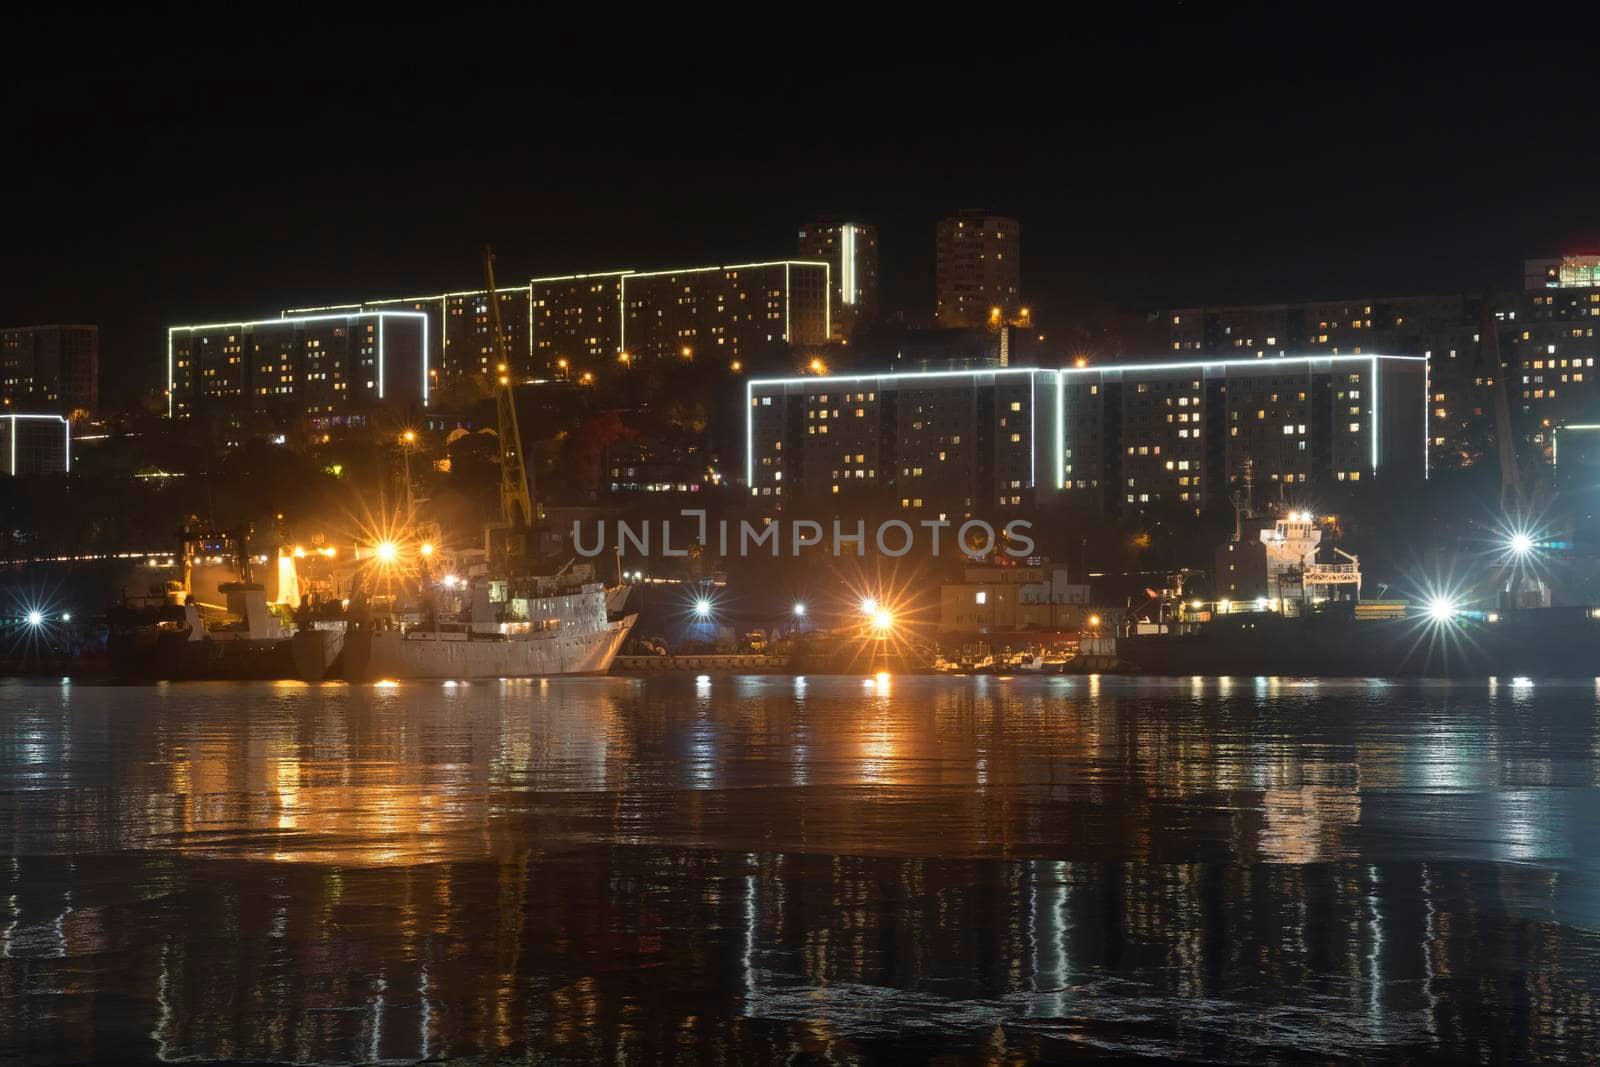 Vladivostok, Russia. Urban landscape with silhouettes of houses and light from lanterns.